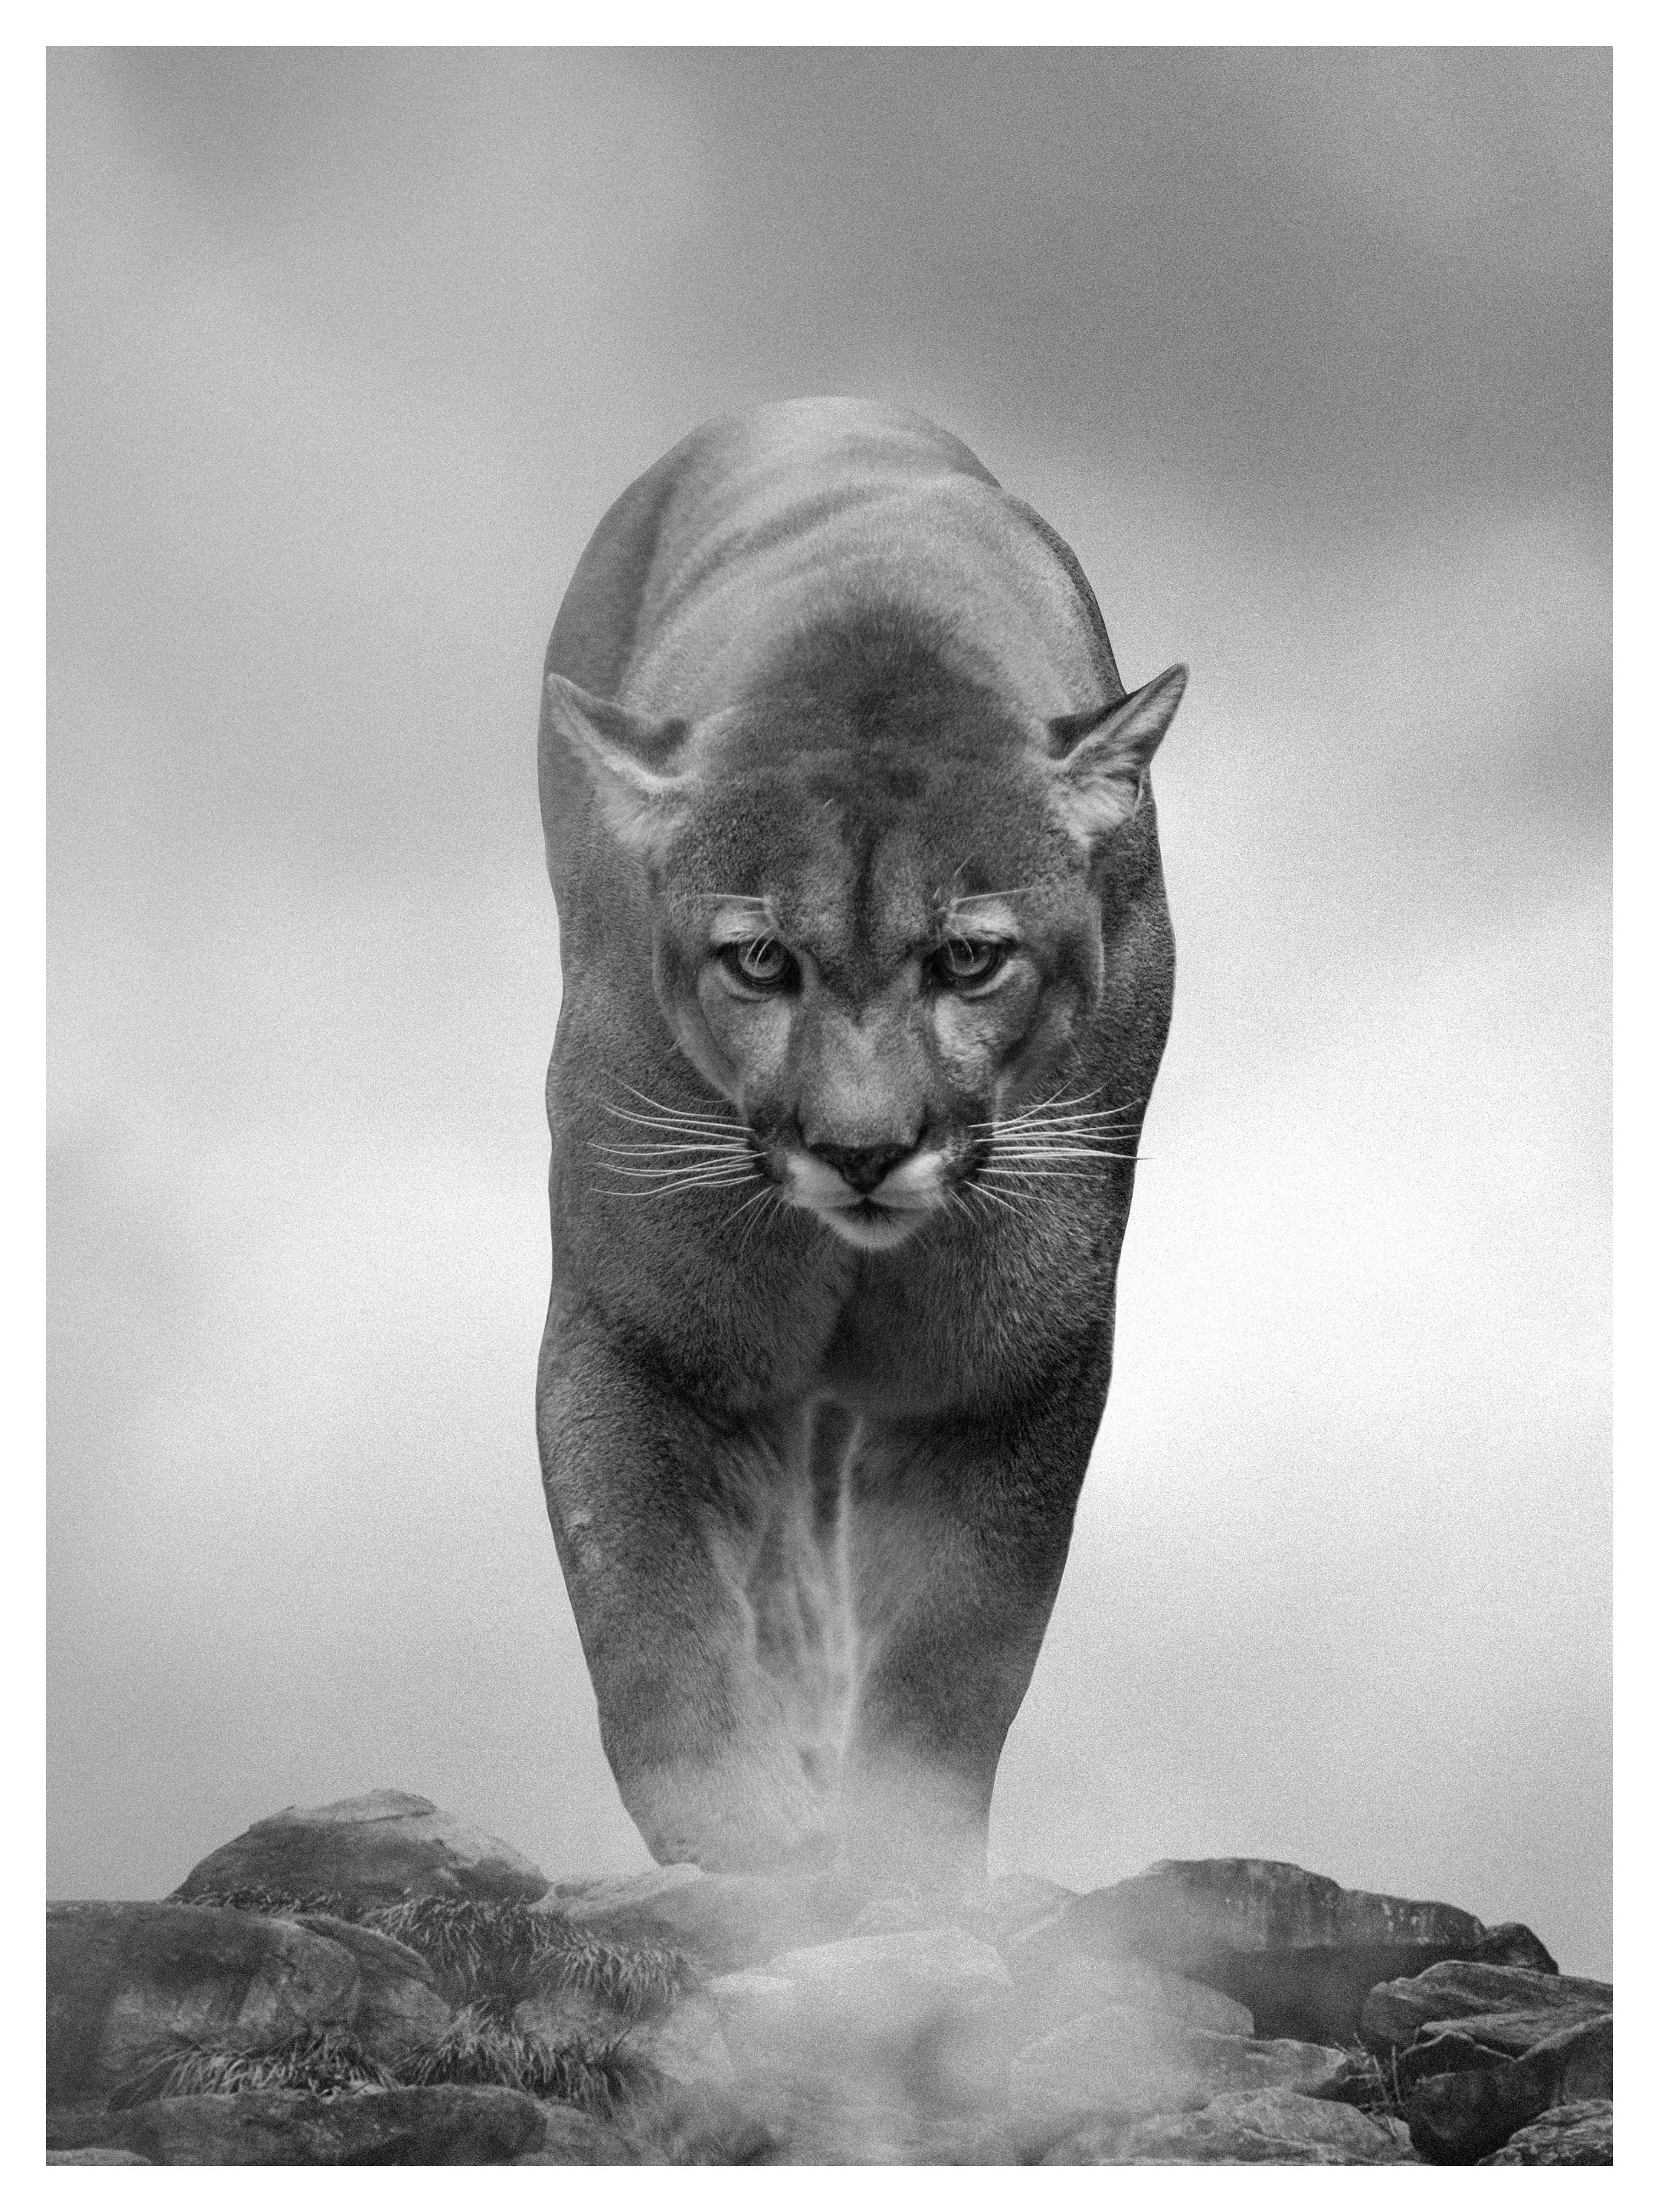 Shane Russeck Animal Print - 36x48 "King of the Mountain", Black and White Photography, Cougar, Mountain Lion